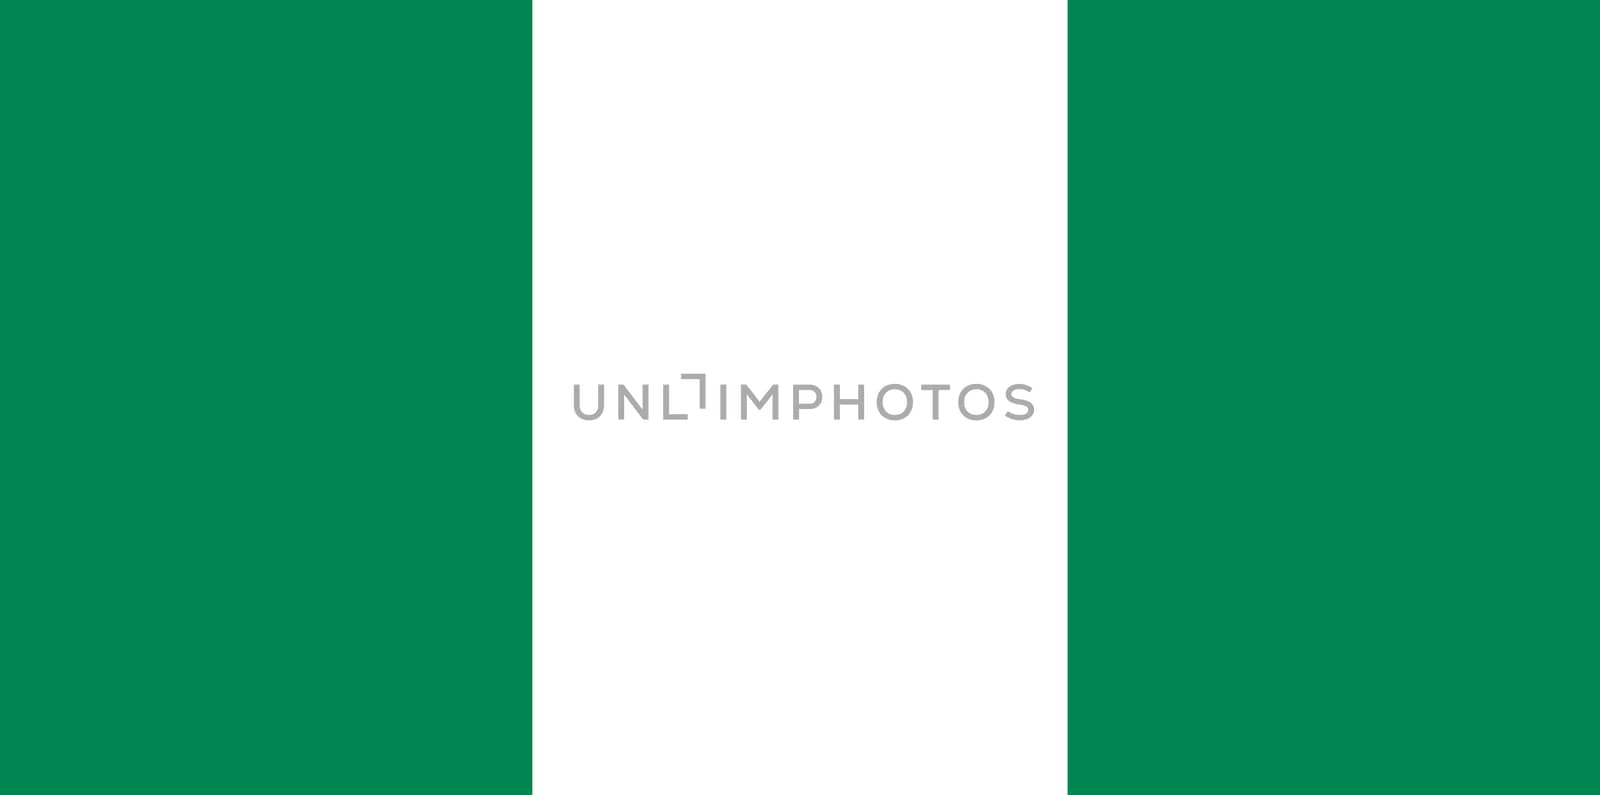 The flag of the African country of Nigeria